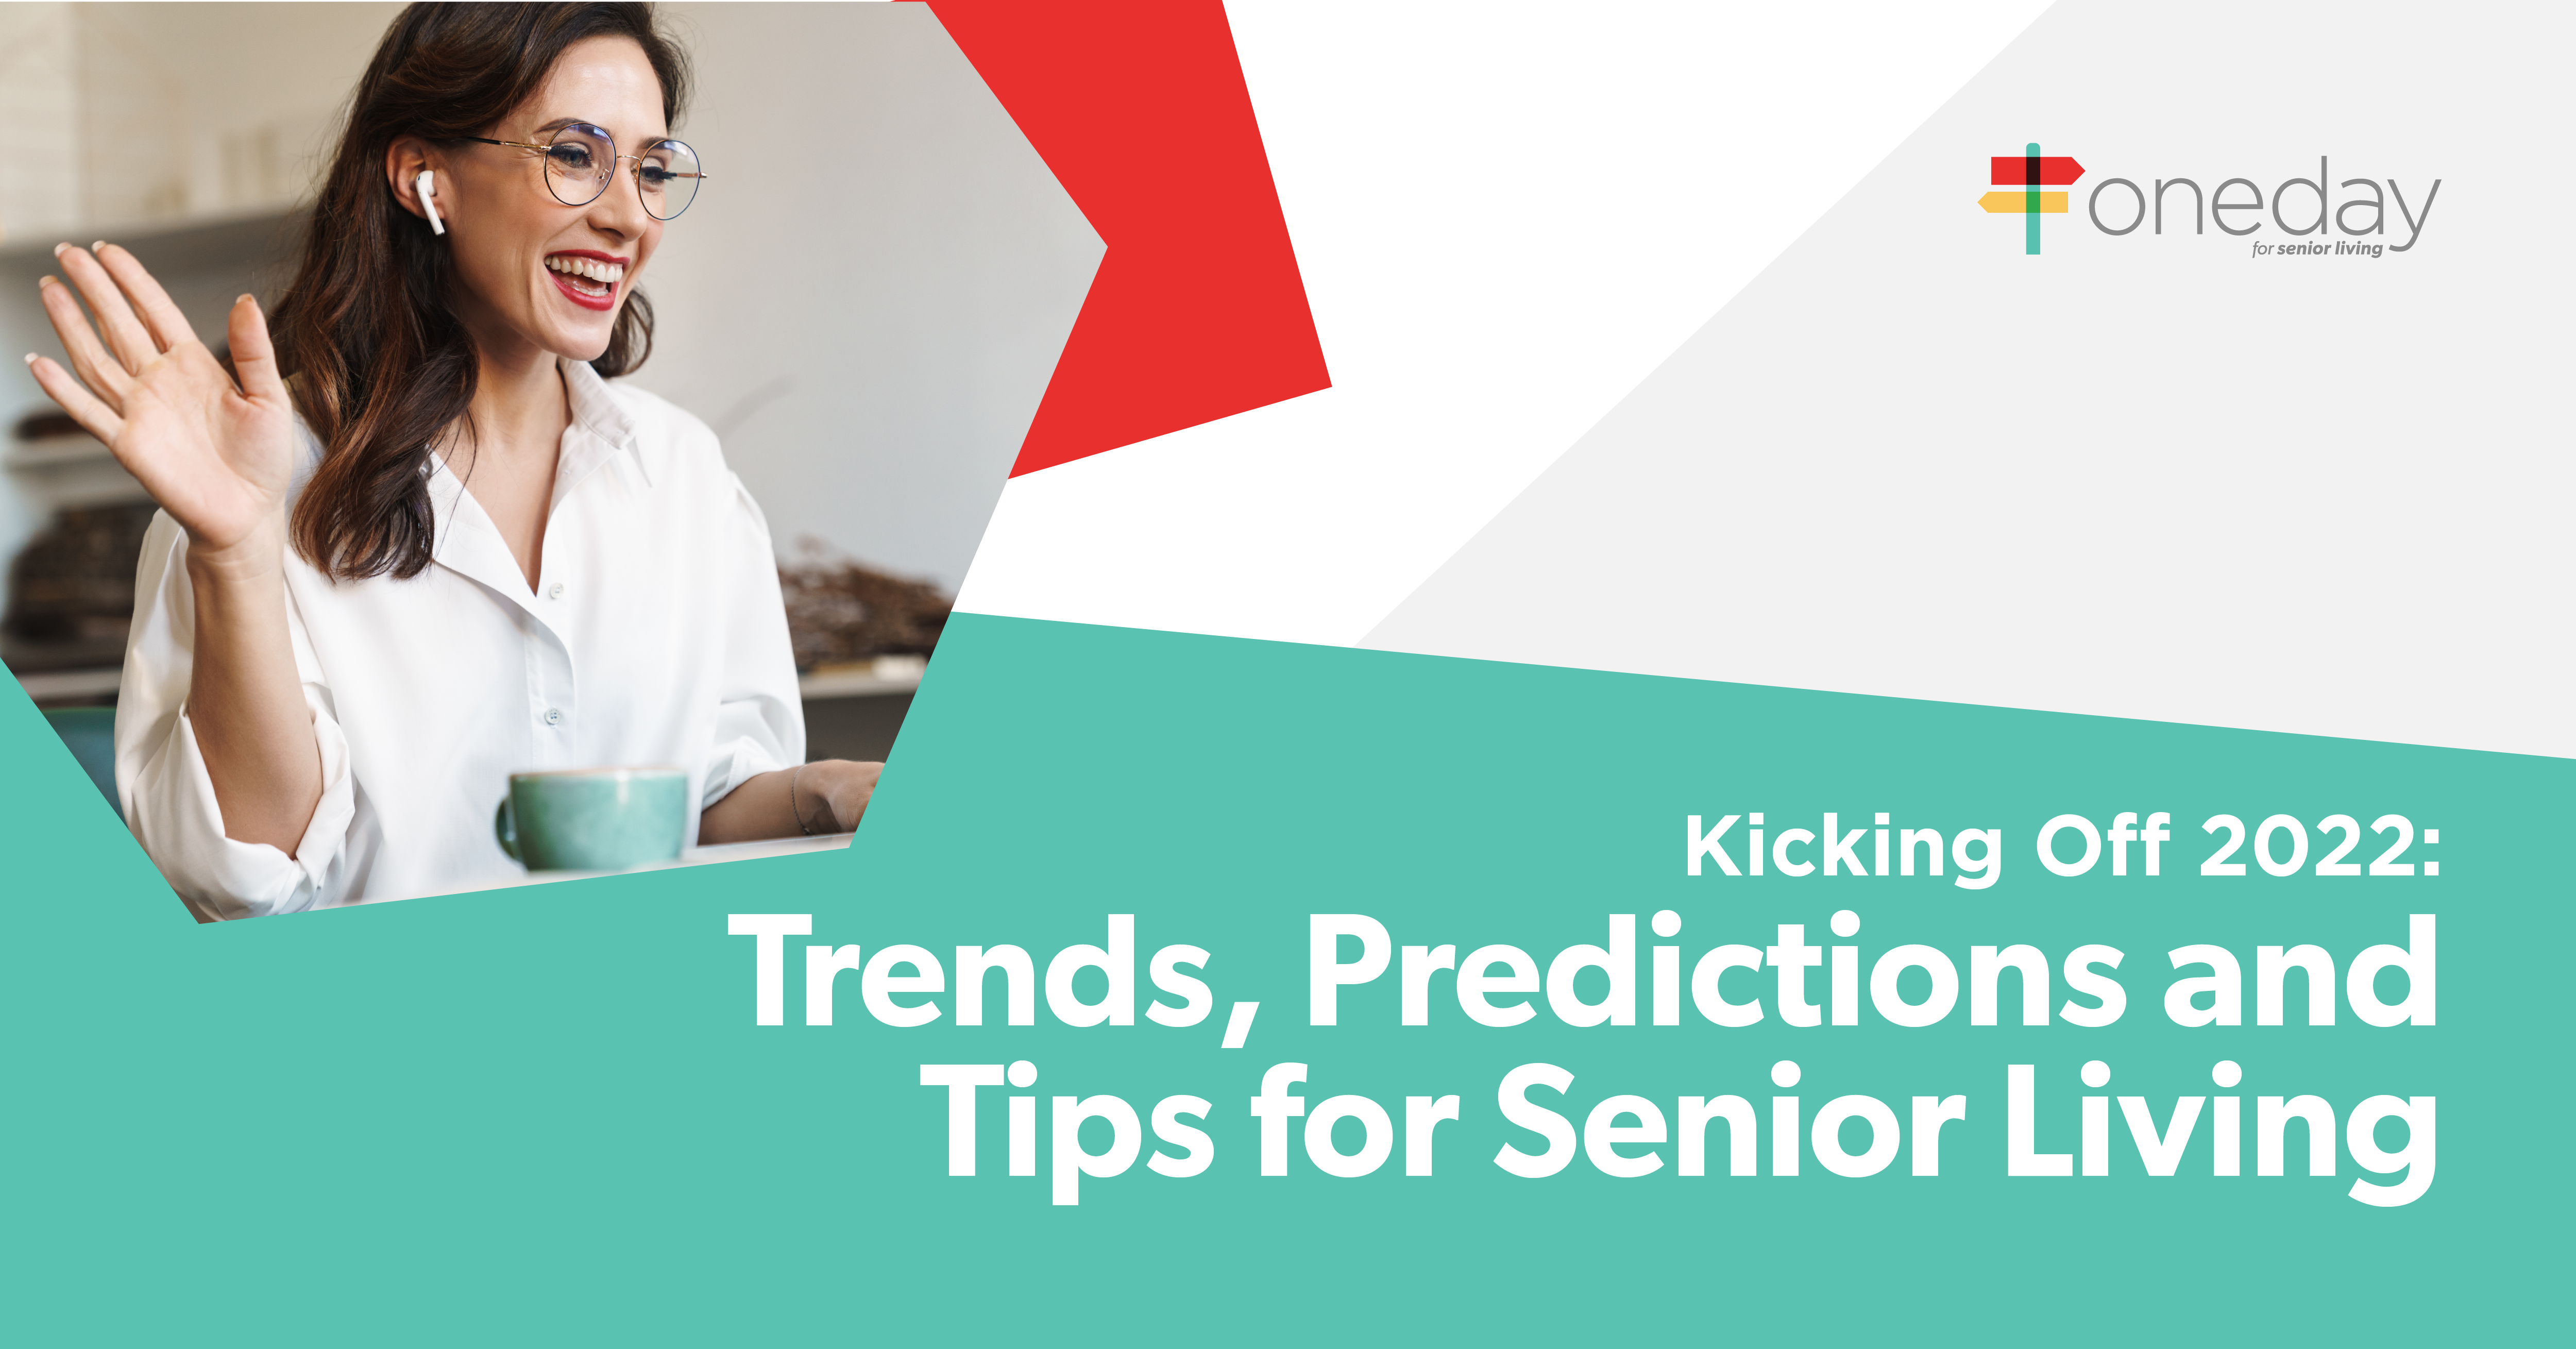 Download OneDay’s latest e-book for a look at what senior living communities should expect in 2022, including best practices from OneDay’s industry experts.